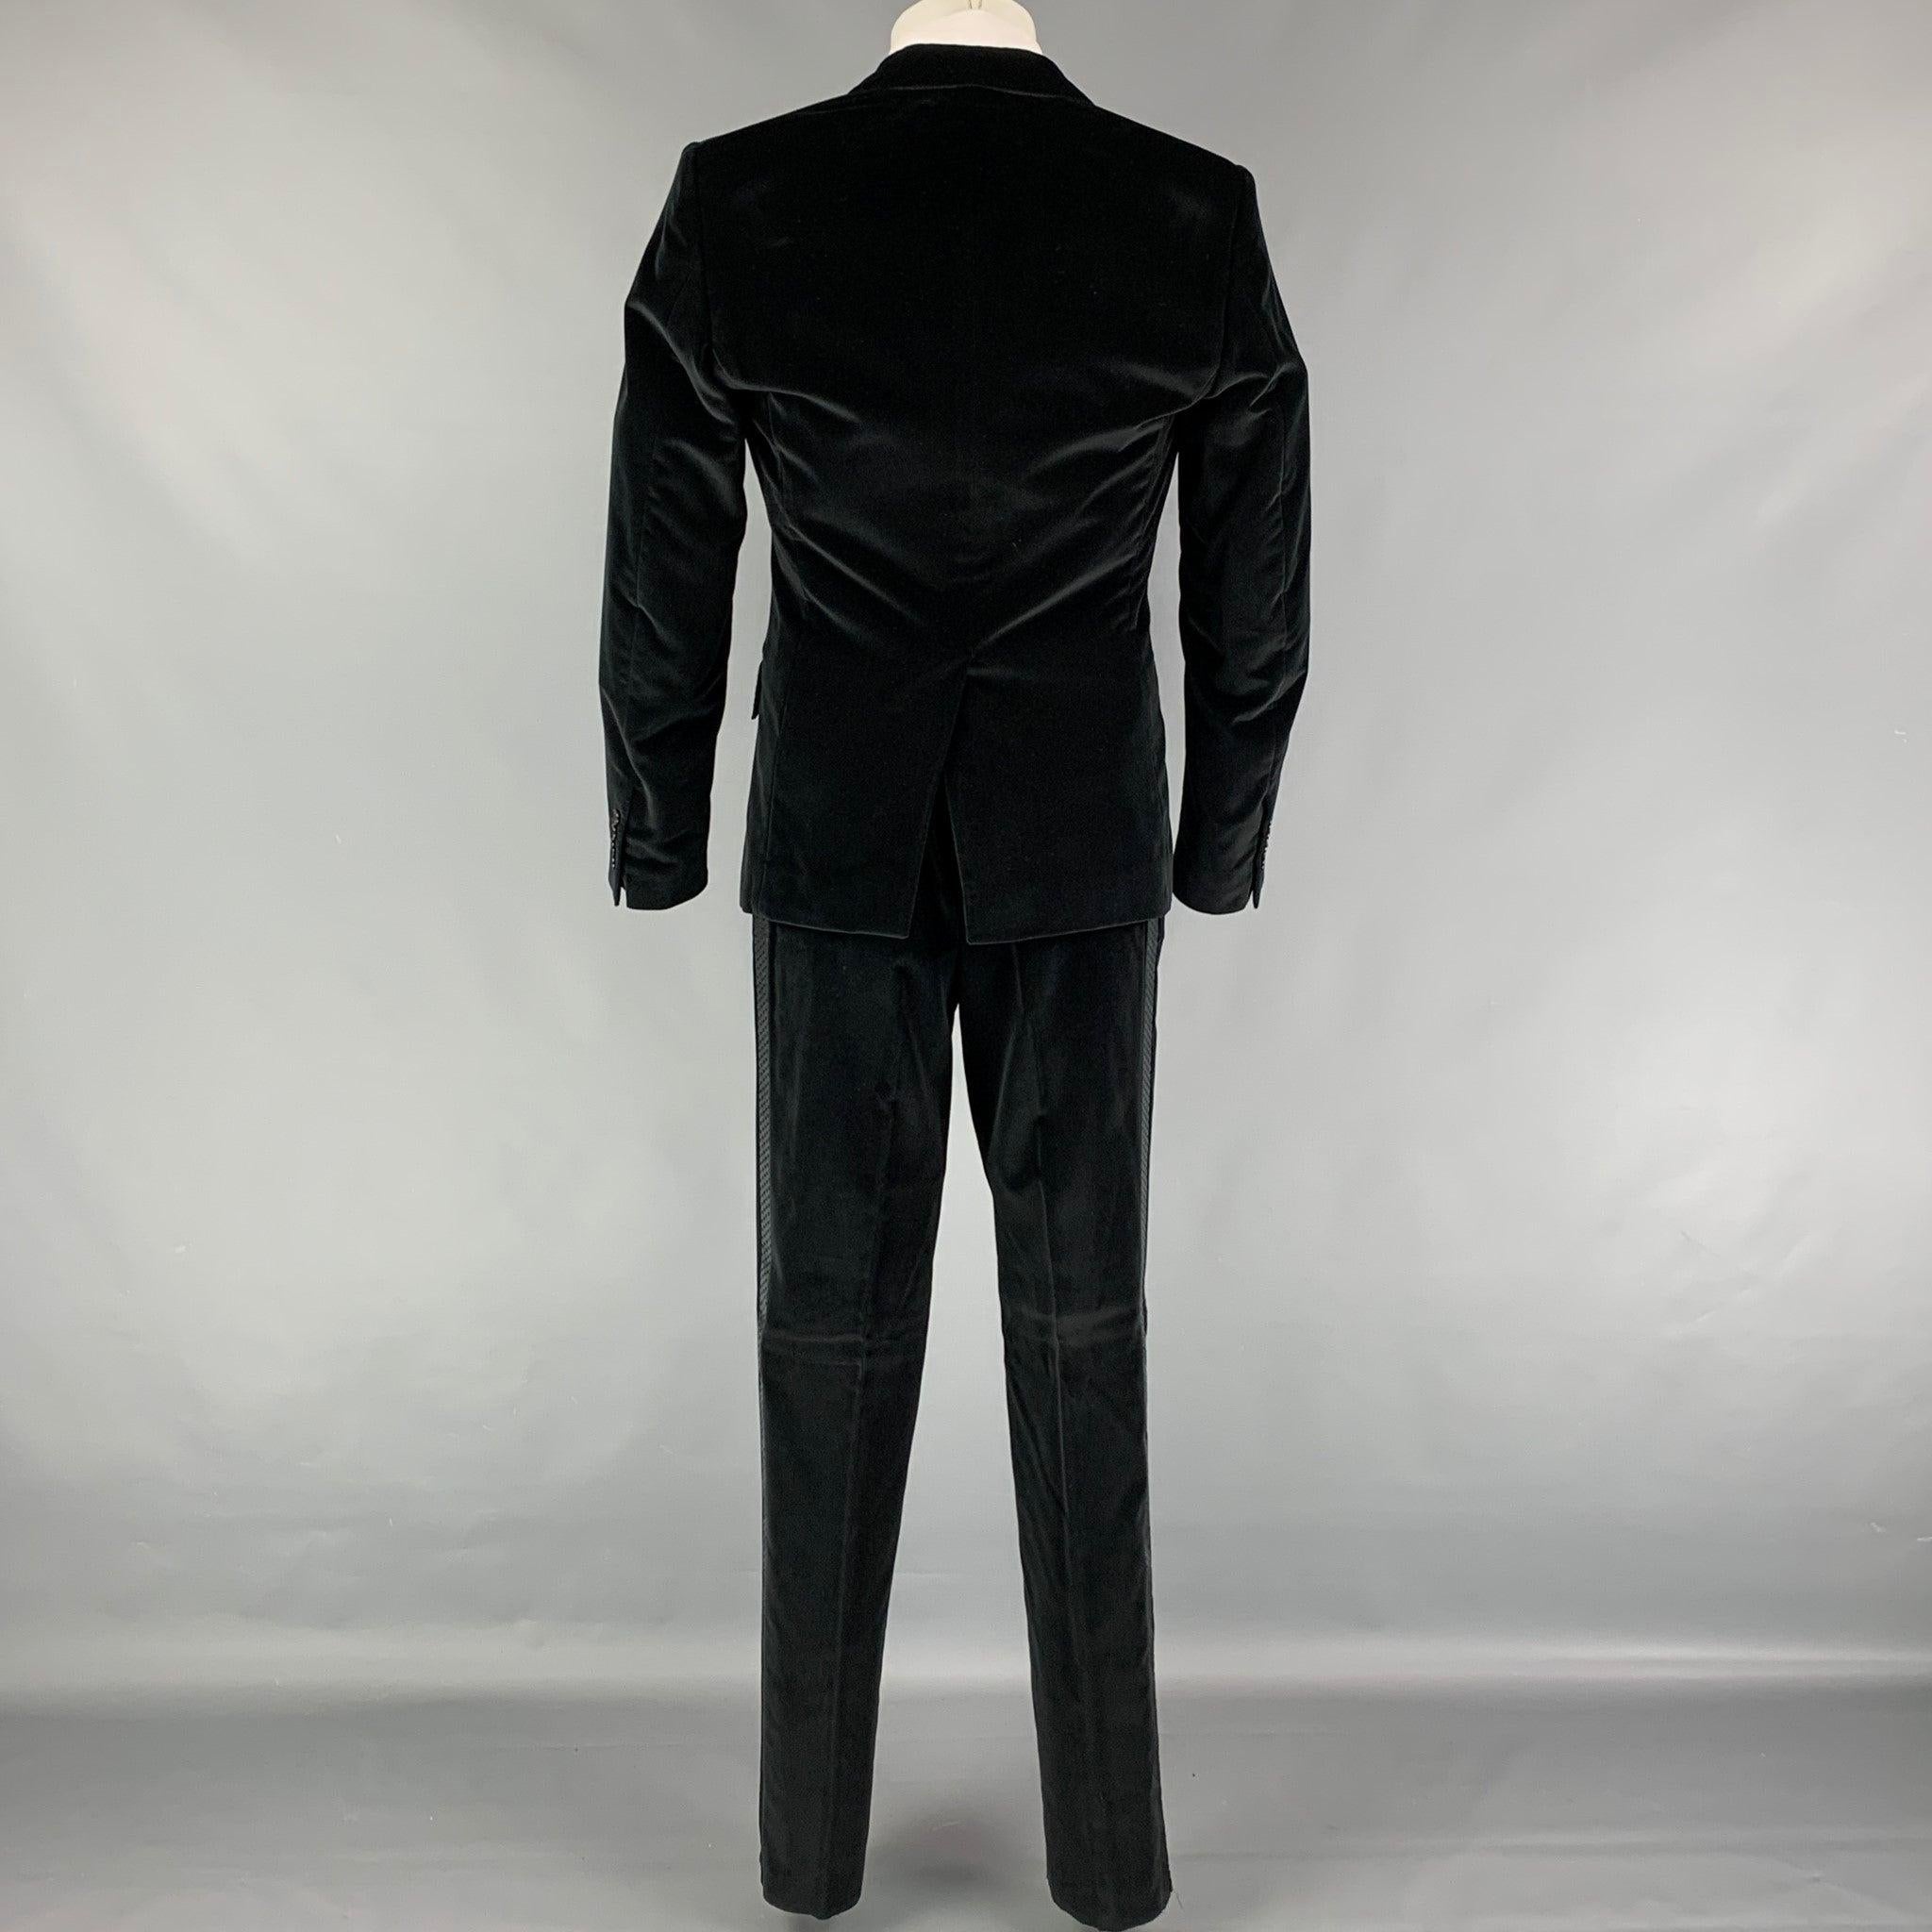 DOLCE & GABBANA Size 40 R Black Velvet Double Breasted 3 Piece Suit In Good Condition For Sale In San Francisco, CA